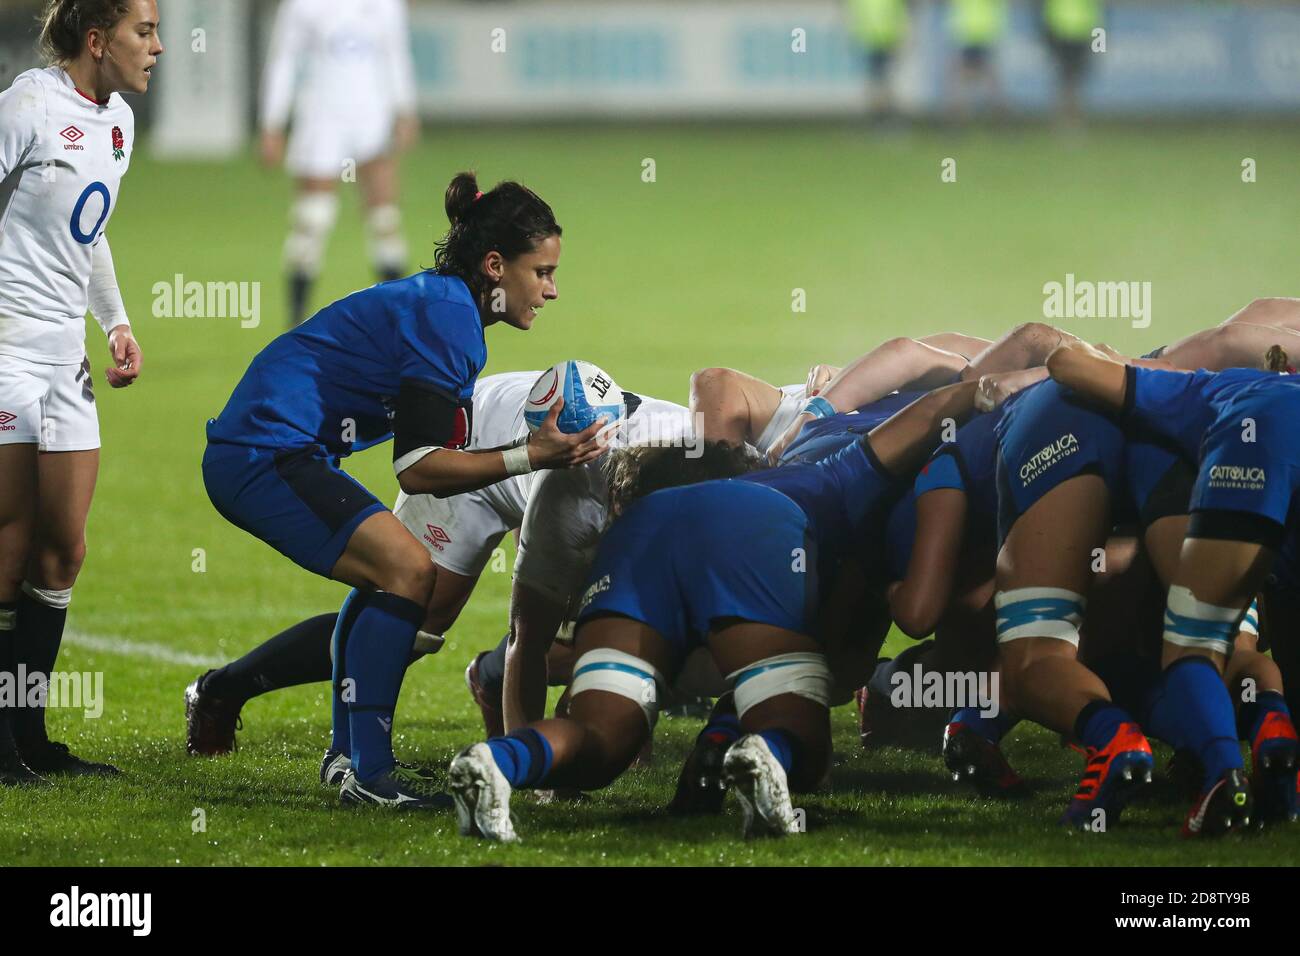 Parma, Italy. 1st Nov, 2020. parma, Italy, Sergio Lanfranchi stadium, 01 Nov 2020, Sara Barattin (Italy) with the put in scrum during Women 2020 - Italy vs England - Rugby Six Nations match - Credit: LM/Massimiliano Carnabuci Credit: Massimiliano Carnabuci/LPS/ZUMA Wire/Alamy Live News Stock Photo